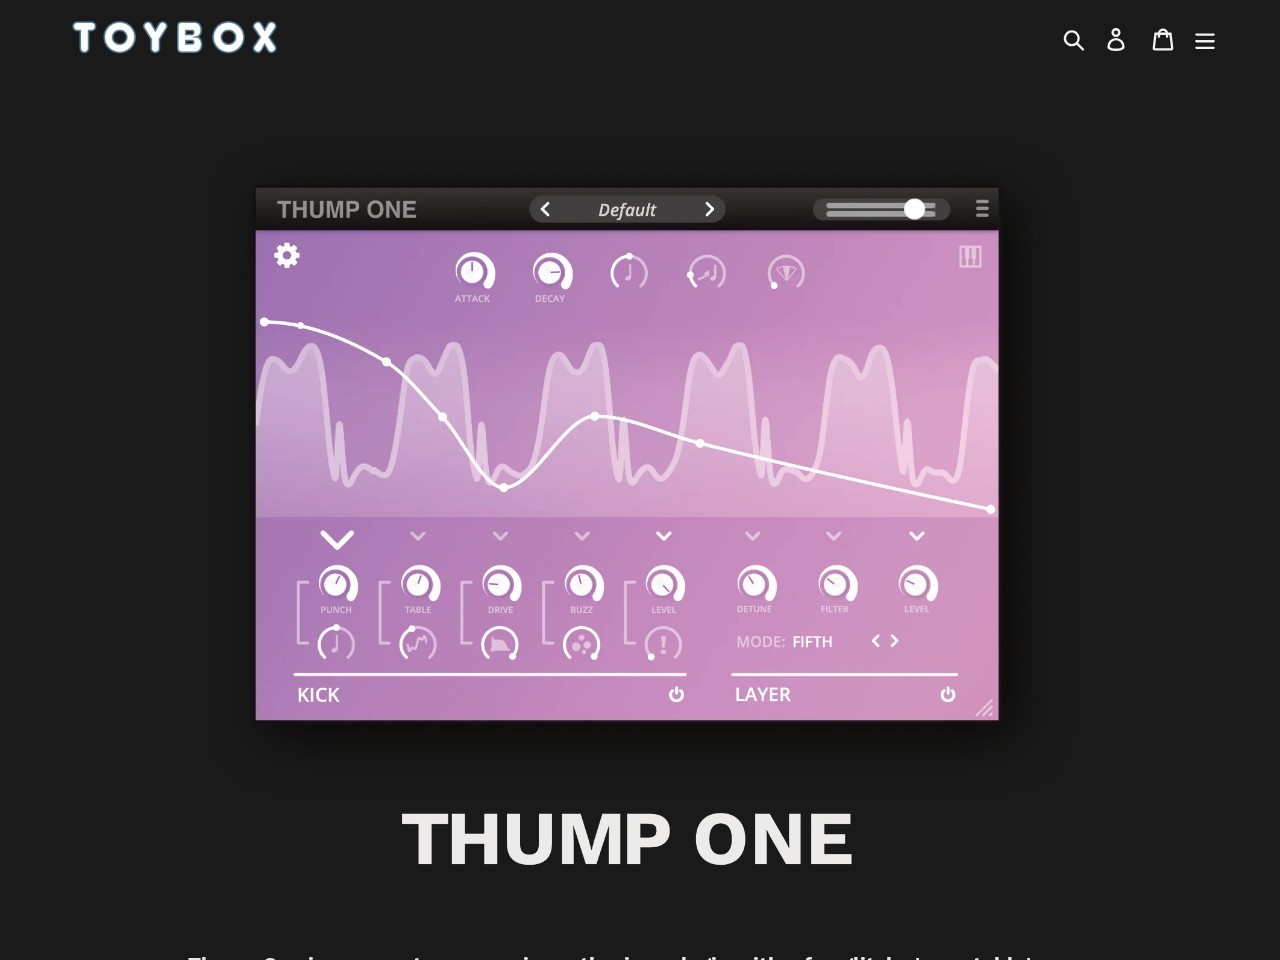 Thump-One – Toy Box